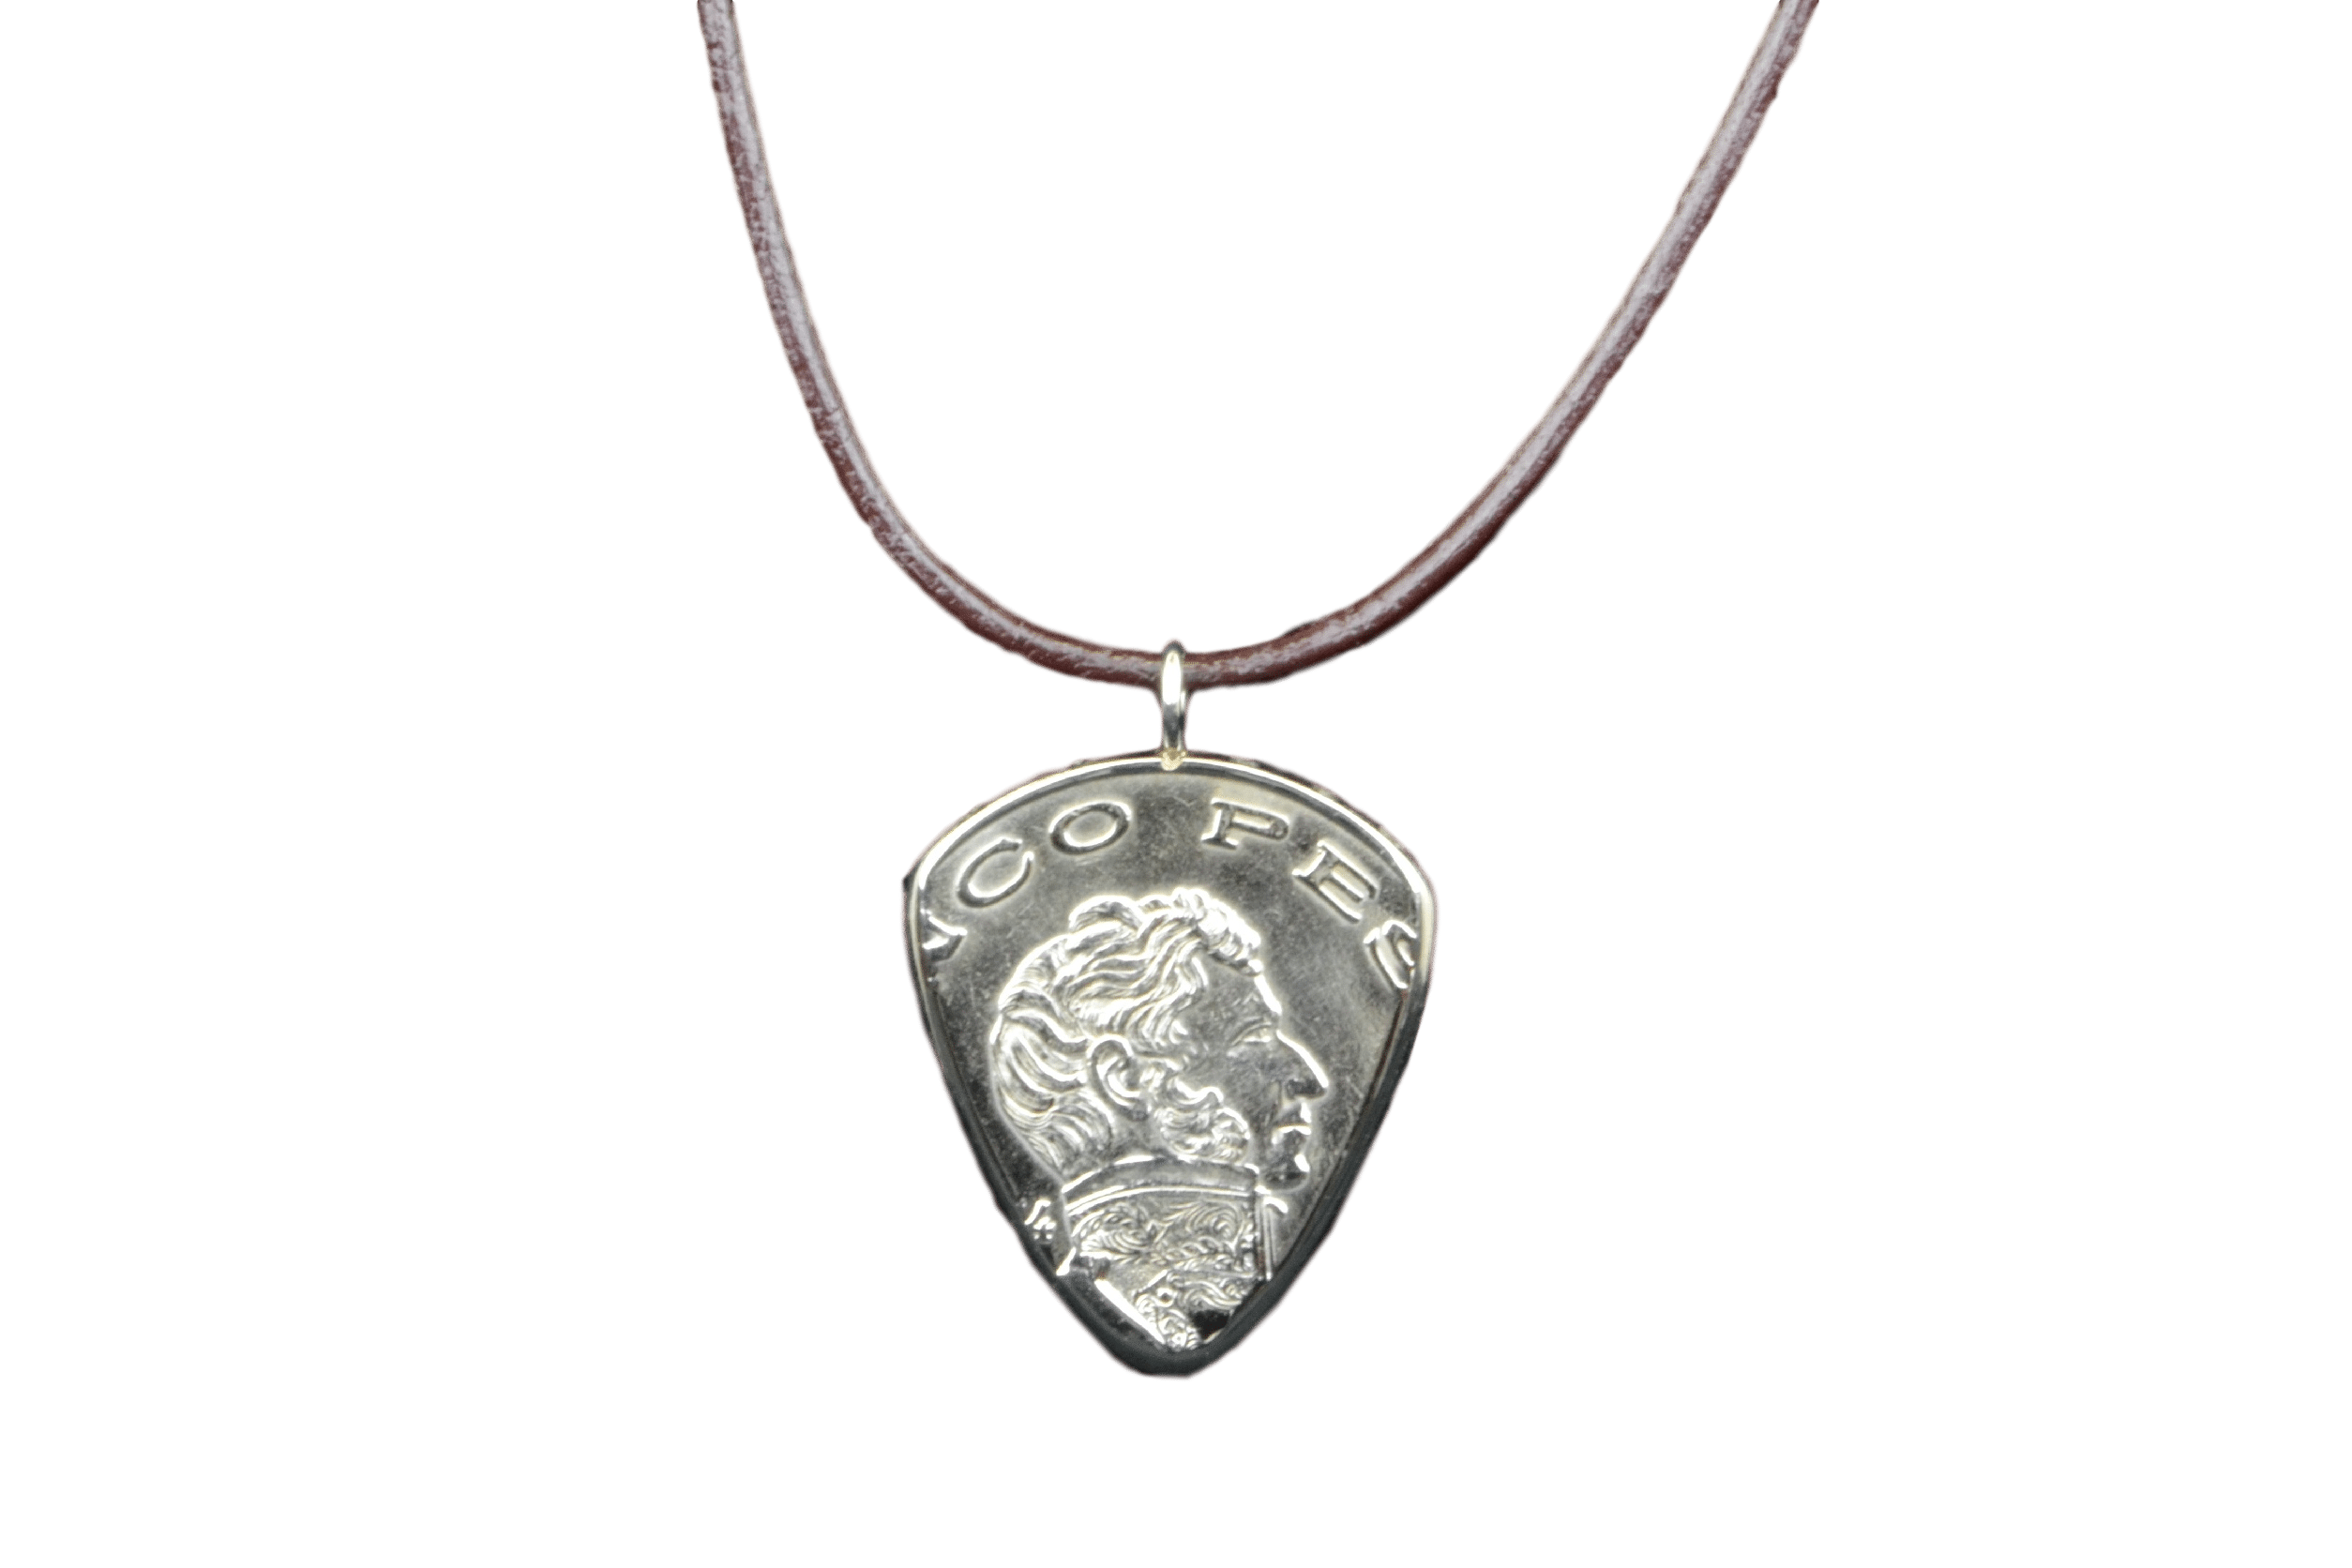 Amazon.com: NICEDREAM Guitar Pick Holder Guitar Pick Necklace with Random 3 Guitar  Picks Custom Engraved Guitar Pick Pendant Personalized Guitar Player Gift  for Musician : Musical Instruments